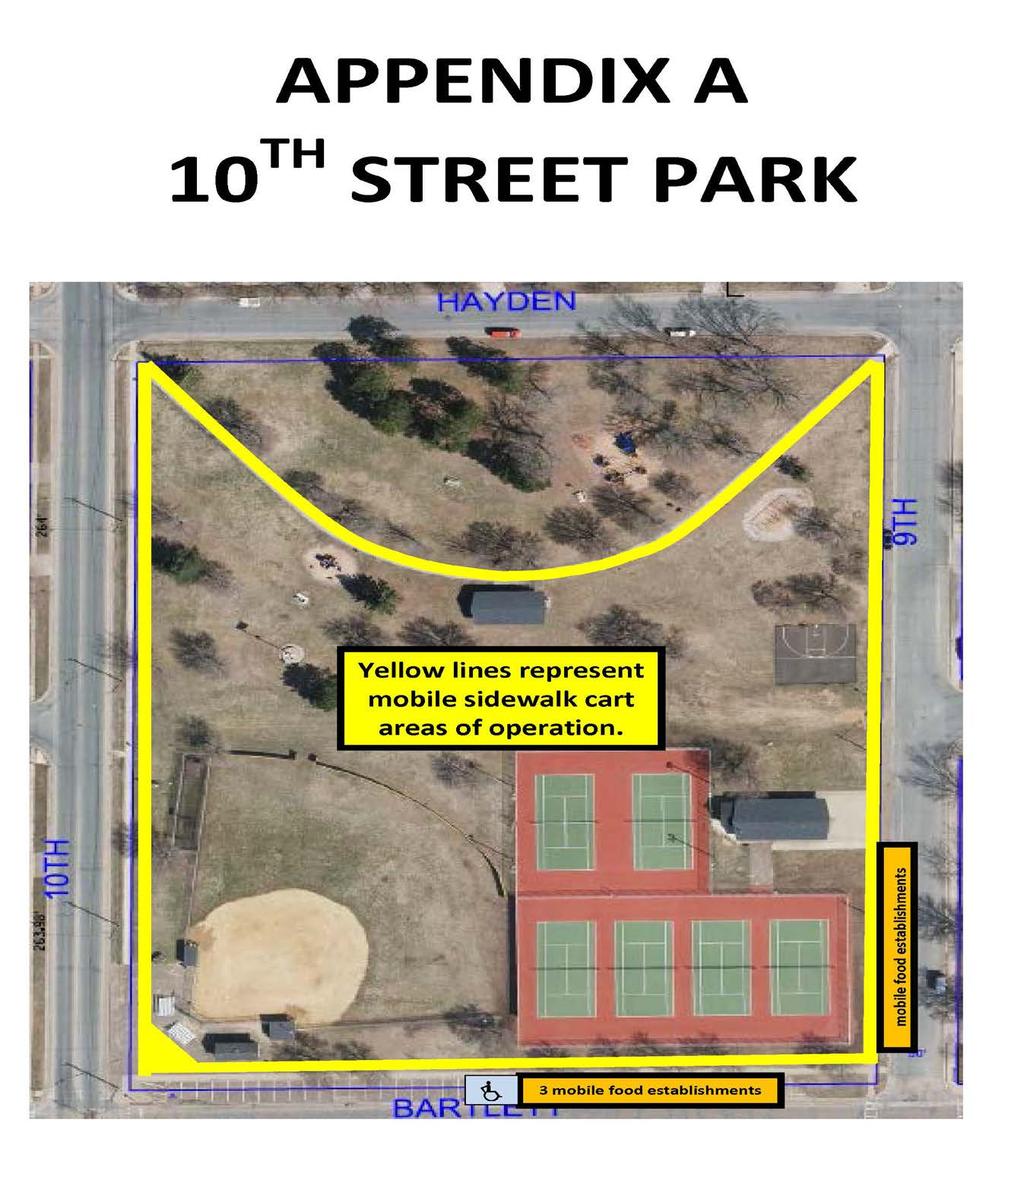 10 th Street Park Locations: Three (3) mobile food vendors may conduct business curbside in the designated area adjacent to the park on 9 th Street or within spaces in designated area (18 spaces) on